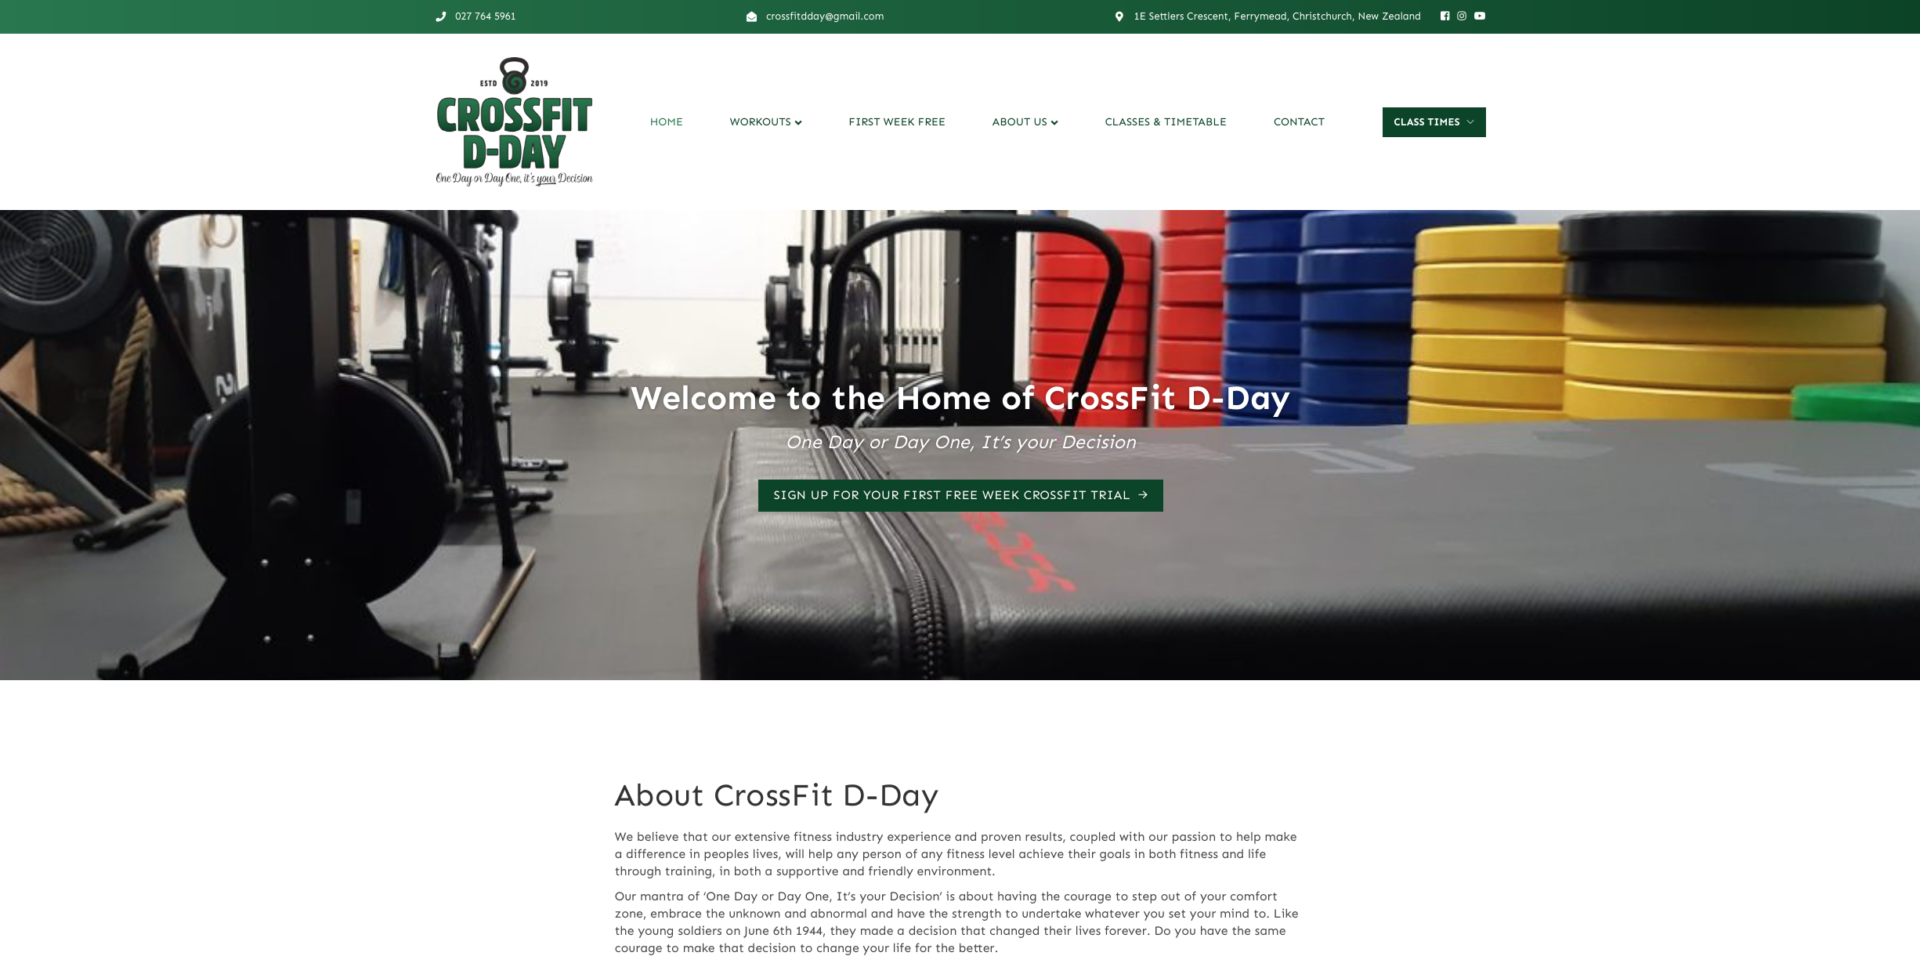 Crossfit D-Day Gym and fitness club New Zealand website design and development with dark green colours symbolizing traditional values and methodologies that work